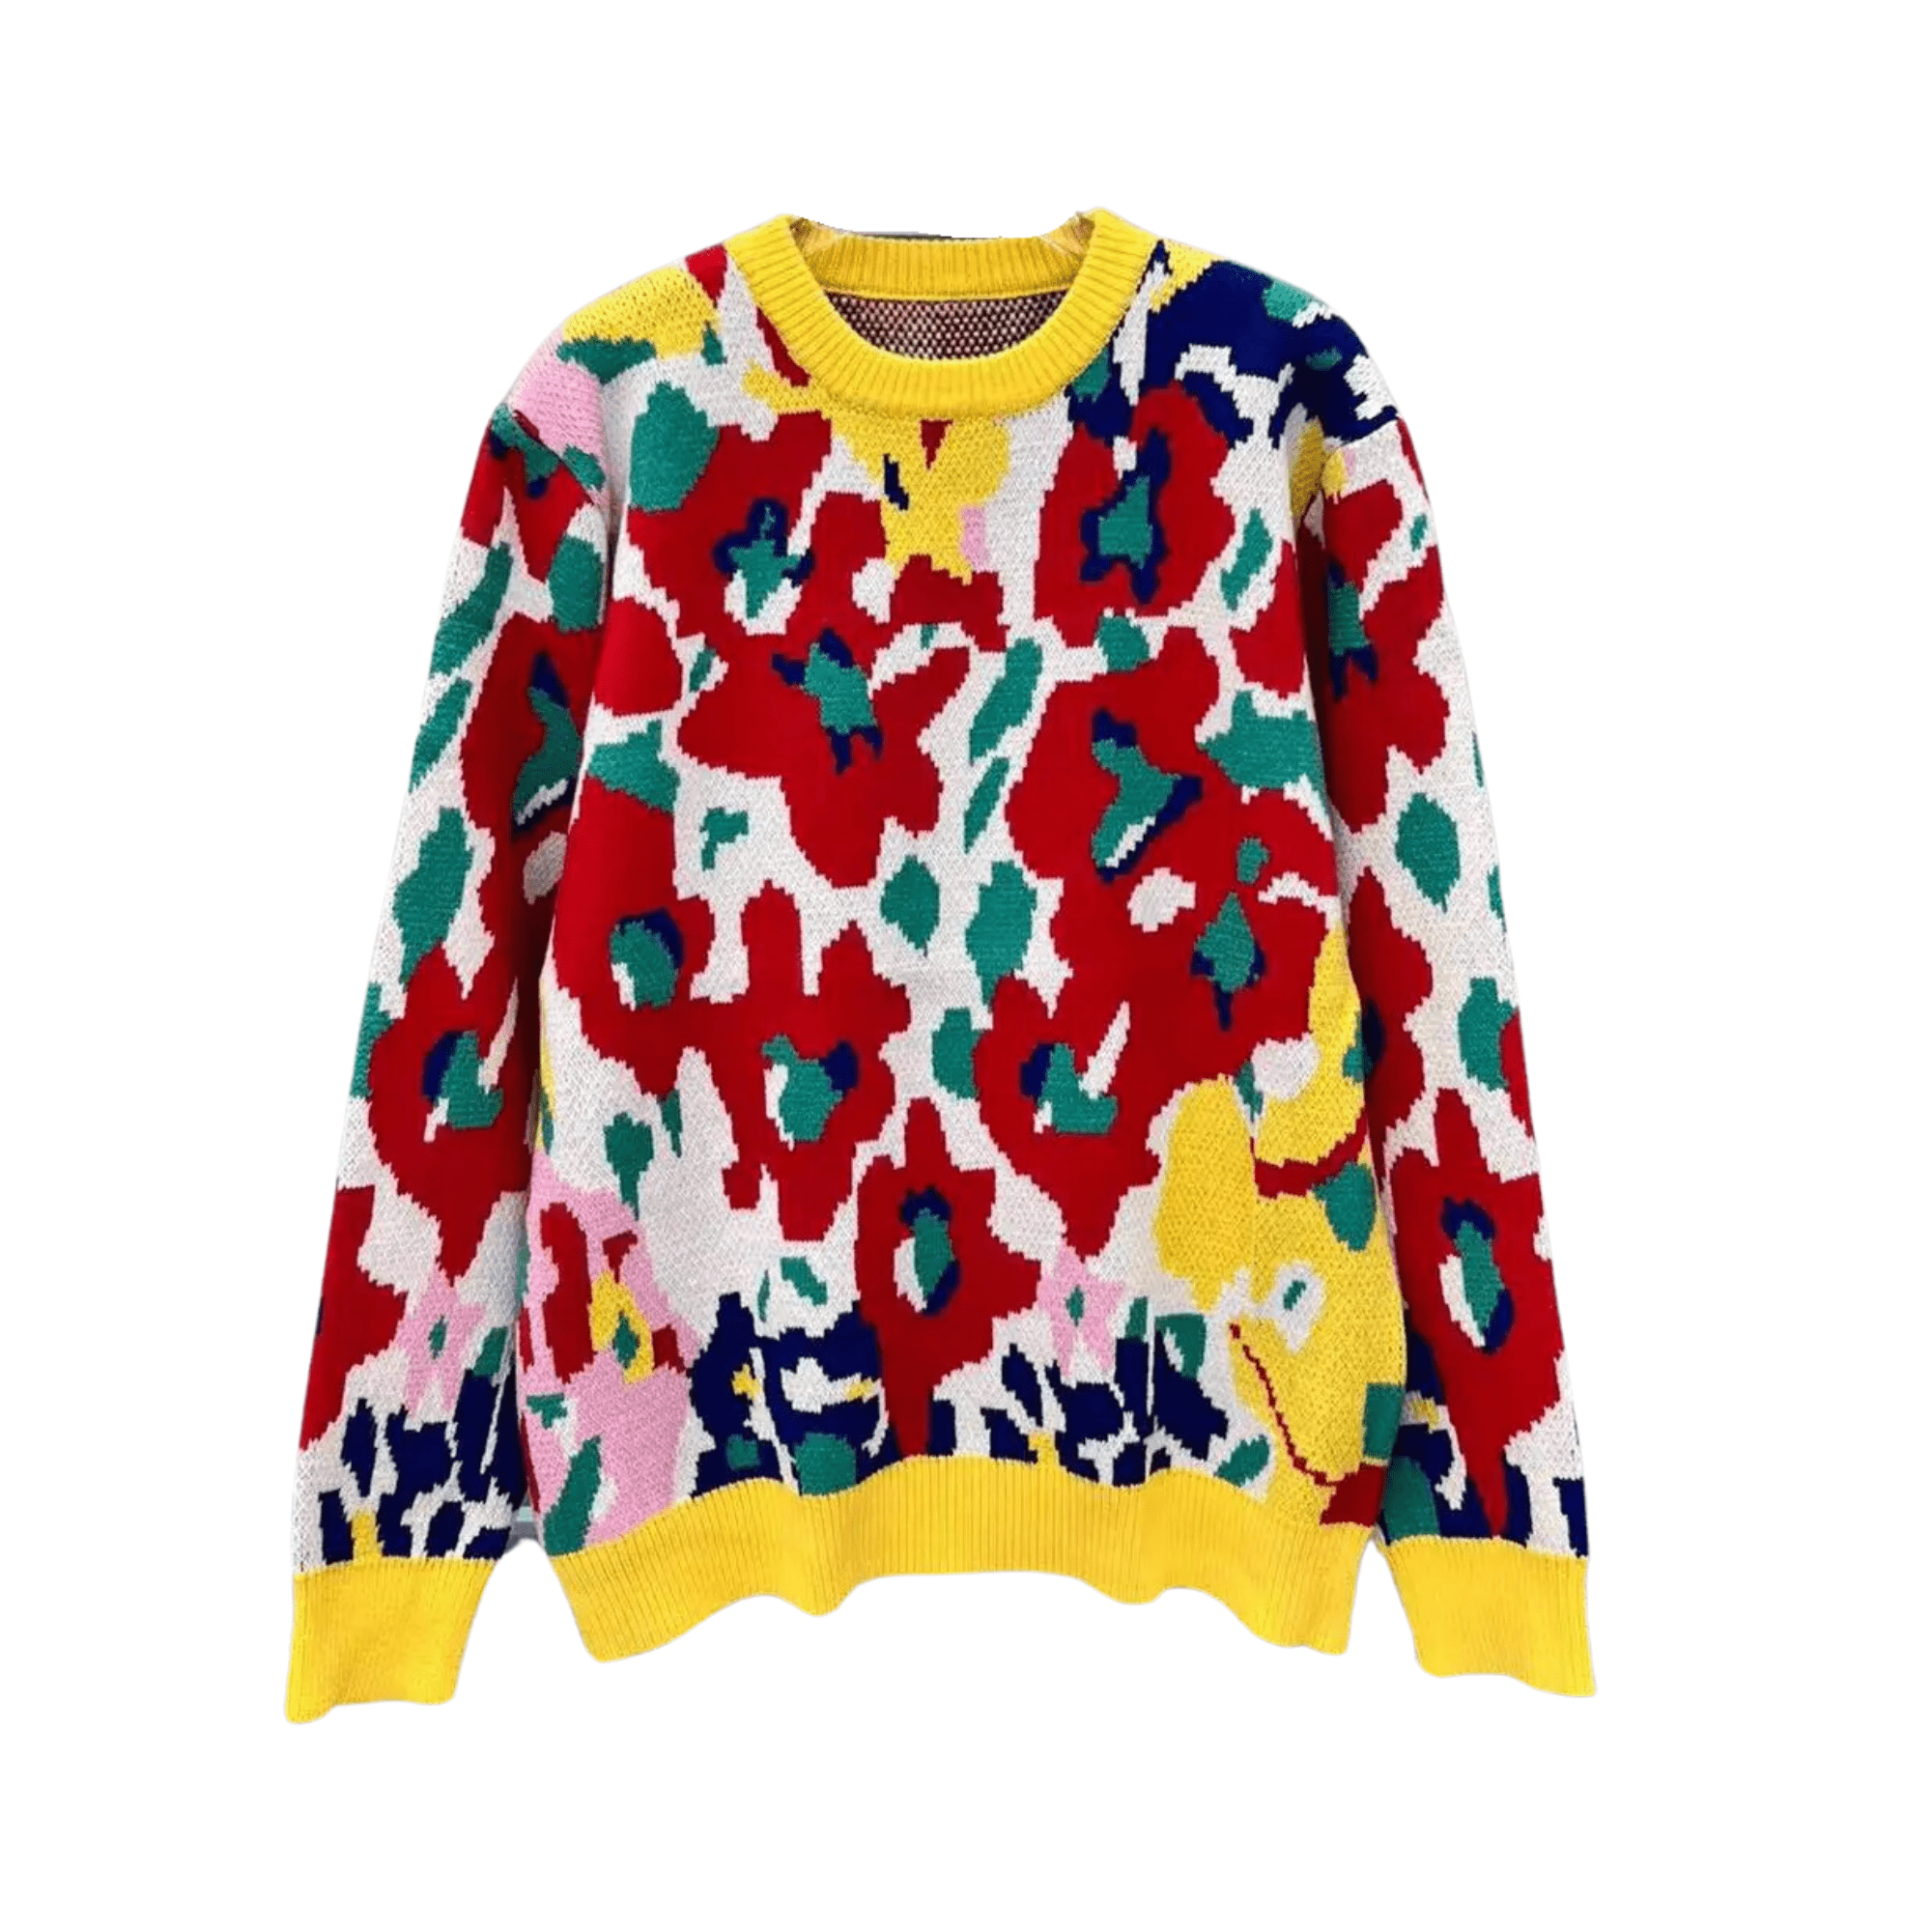 Abstract Floral Knitted Sweater - Kelly Obi New York